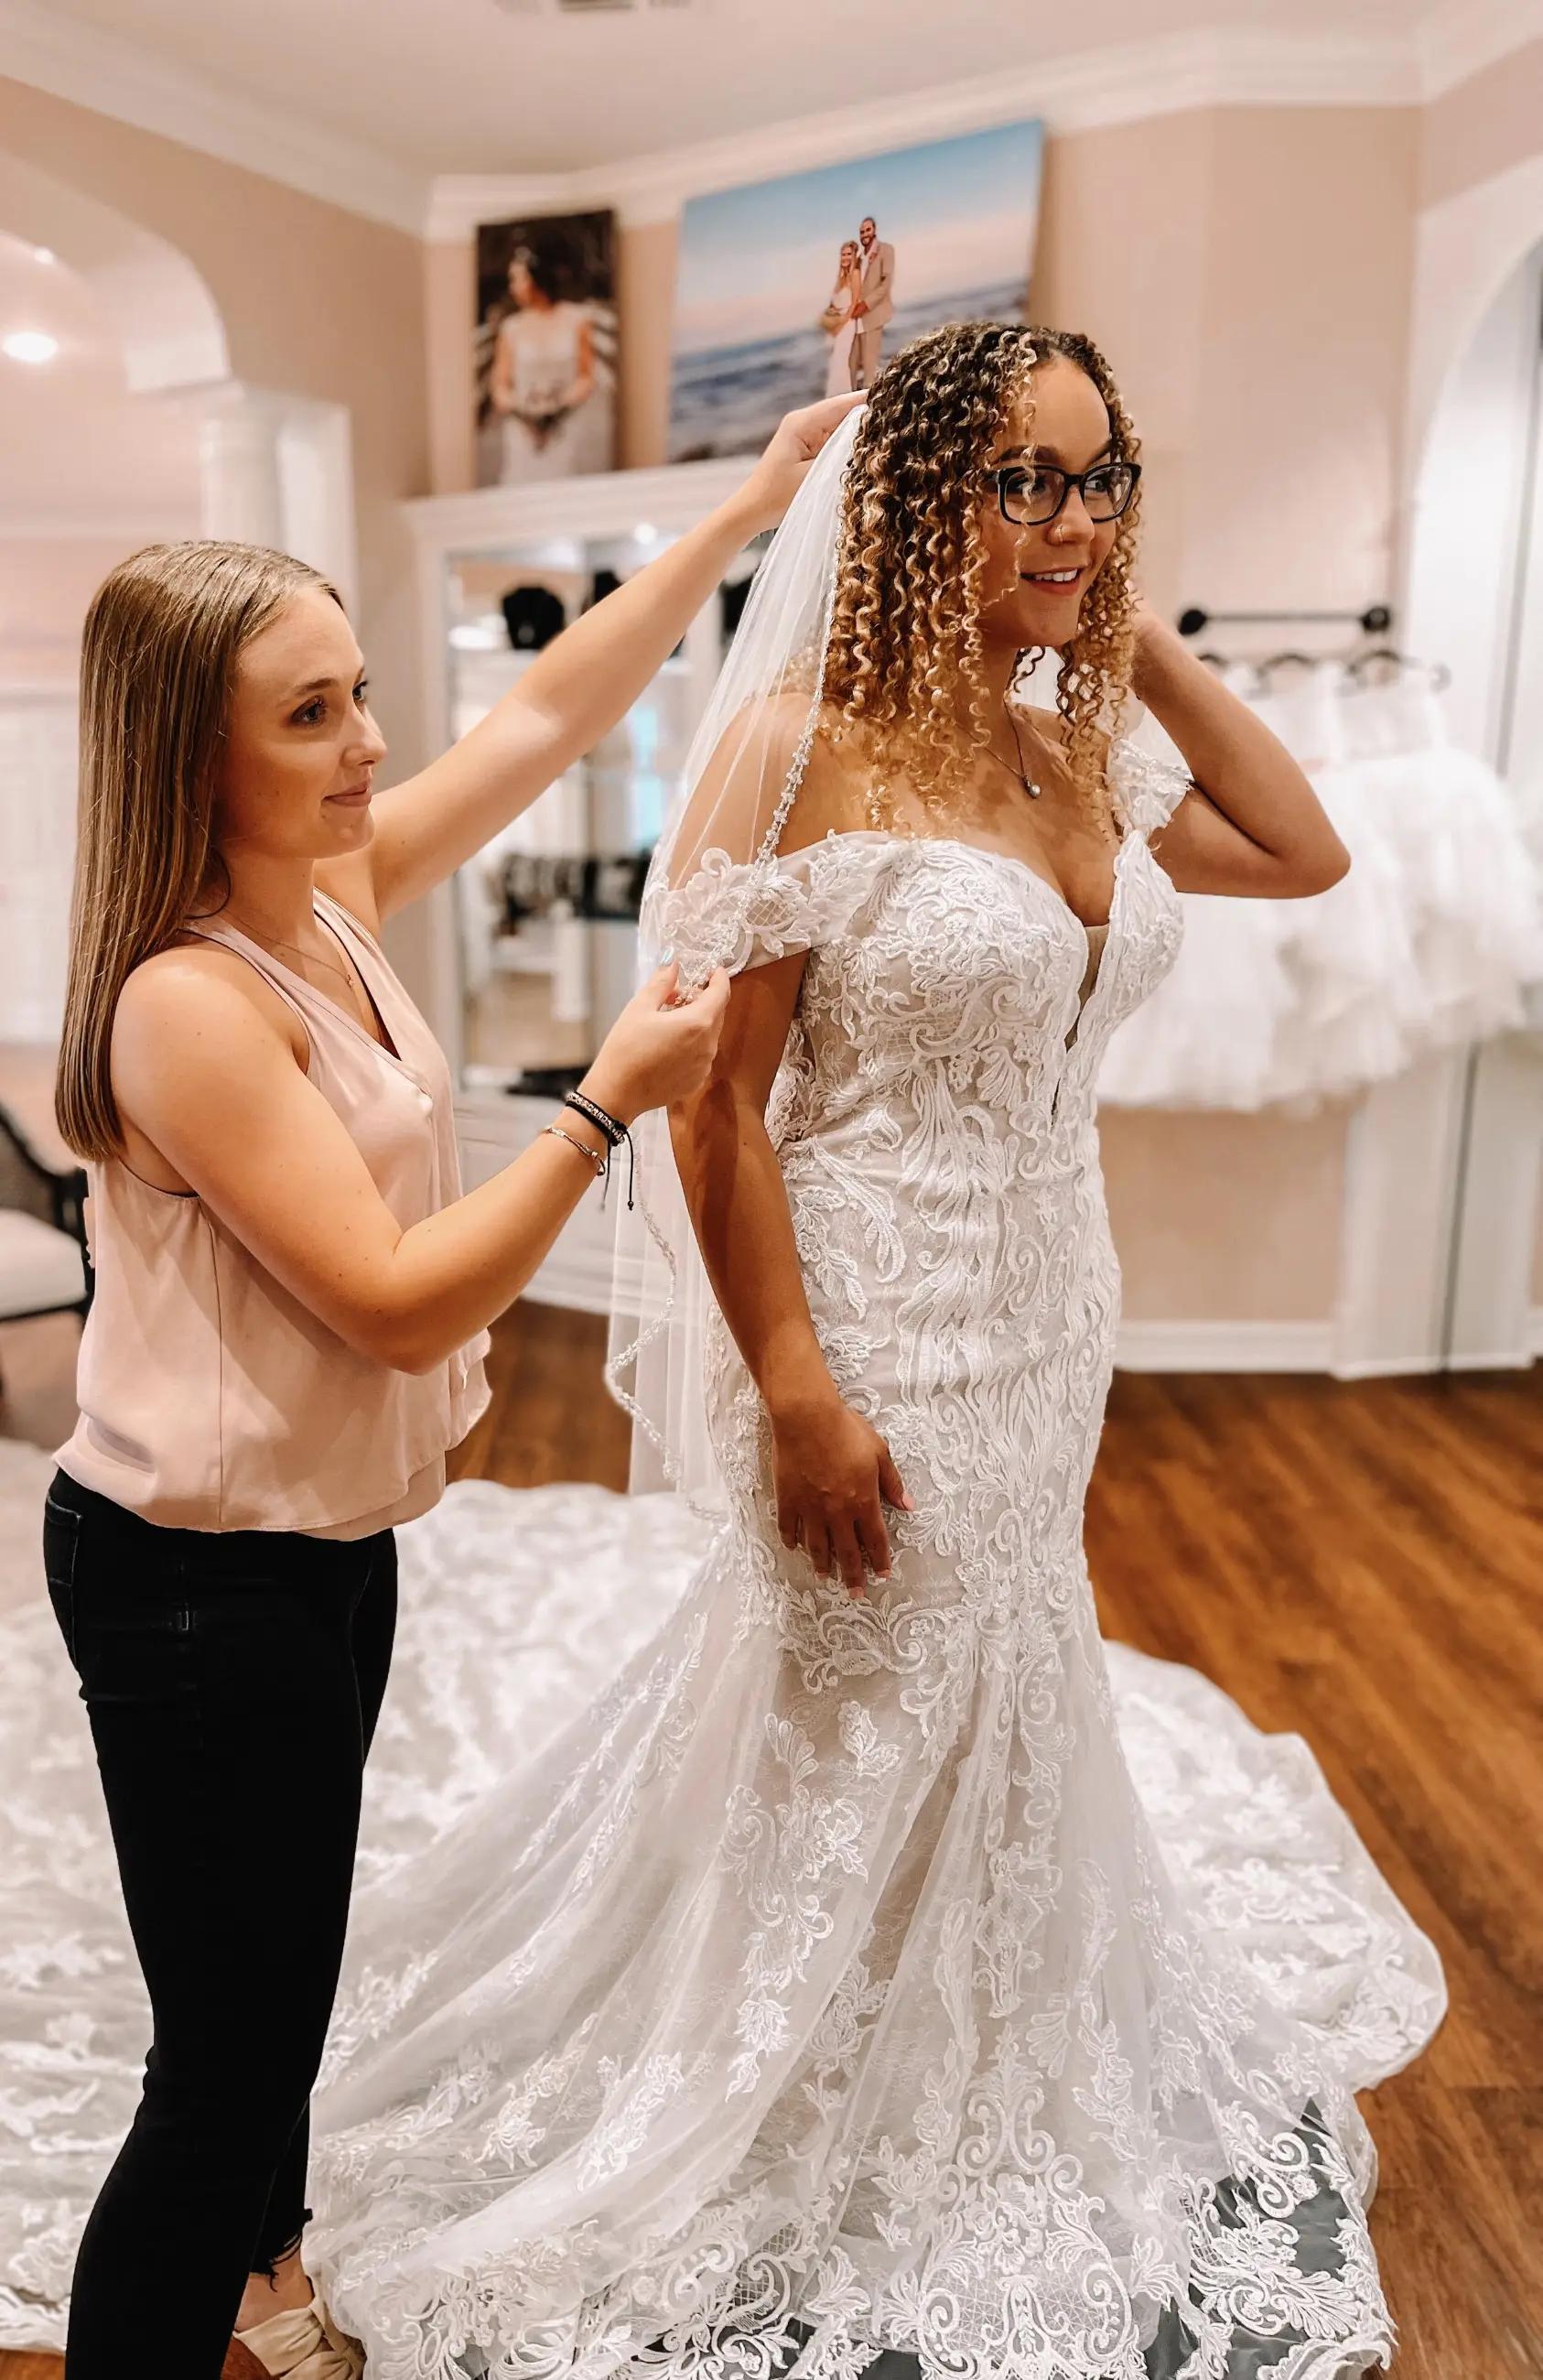 The First Bridal Appointment Image